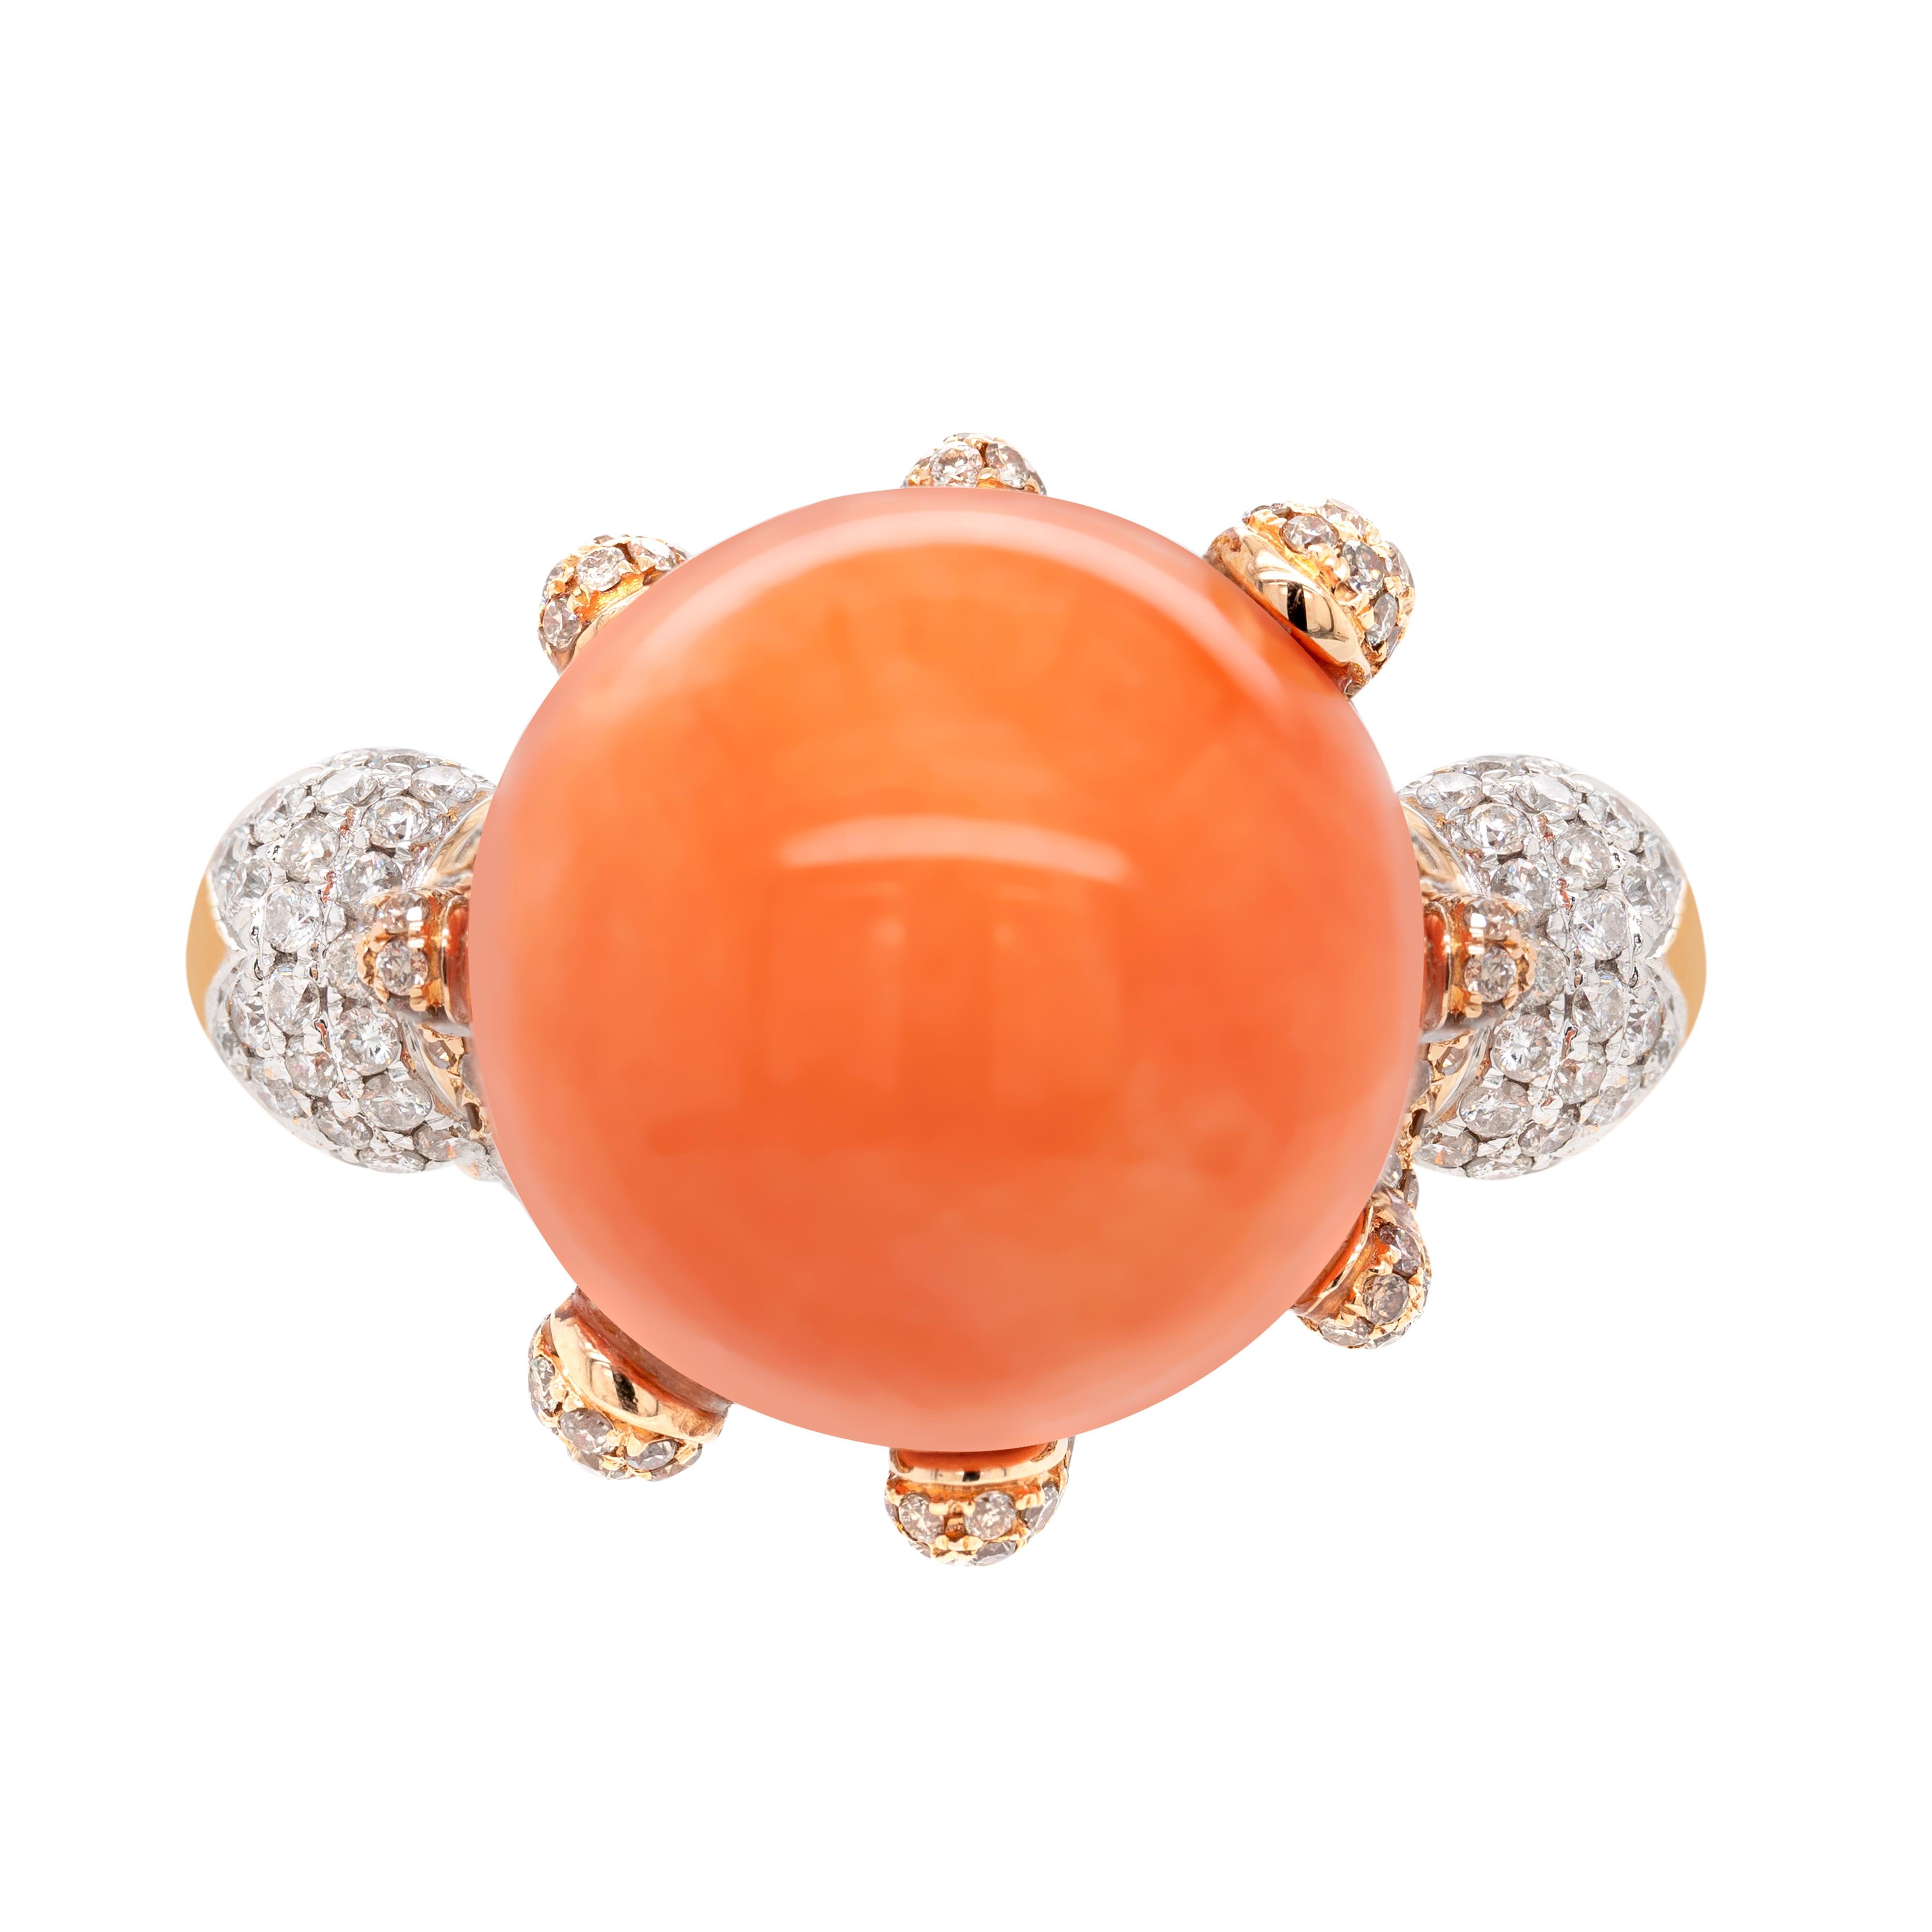 This unusual 18 carat rose gold cocktail ring features an impressive perfectly round natural coral measuring 16.5mm. The wonderful coral is securely held by 8 asymmetrical fluid claws, all masterfully micro set with round brilliant cut diamonds